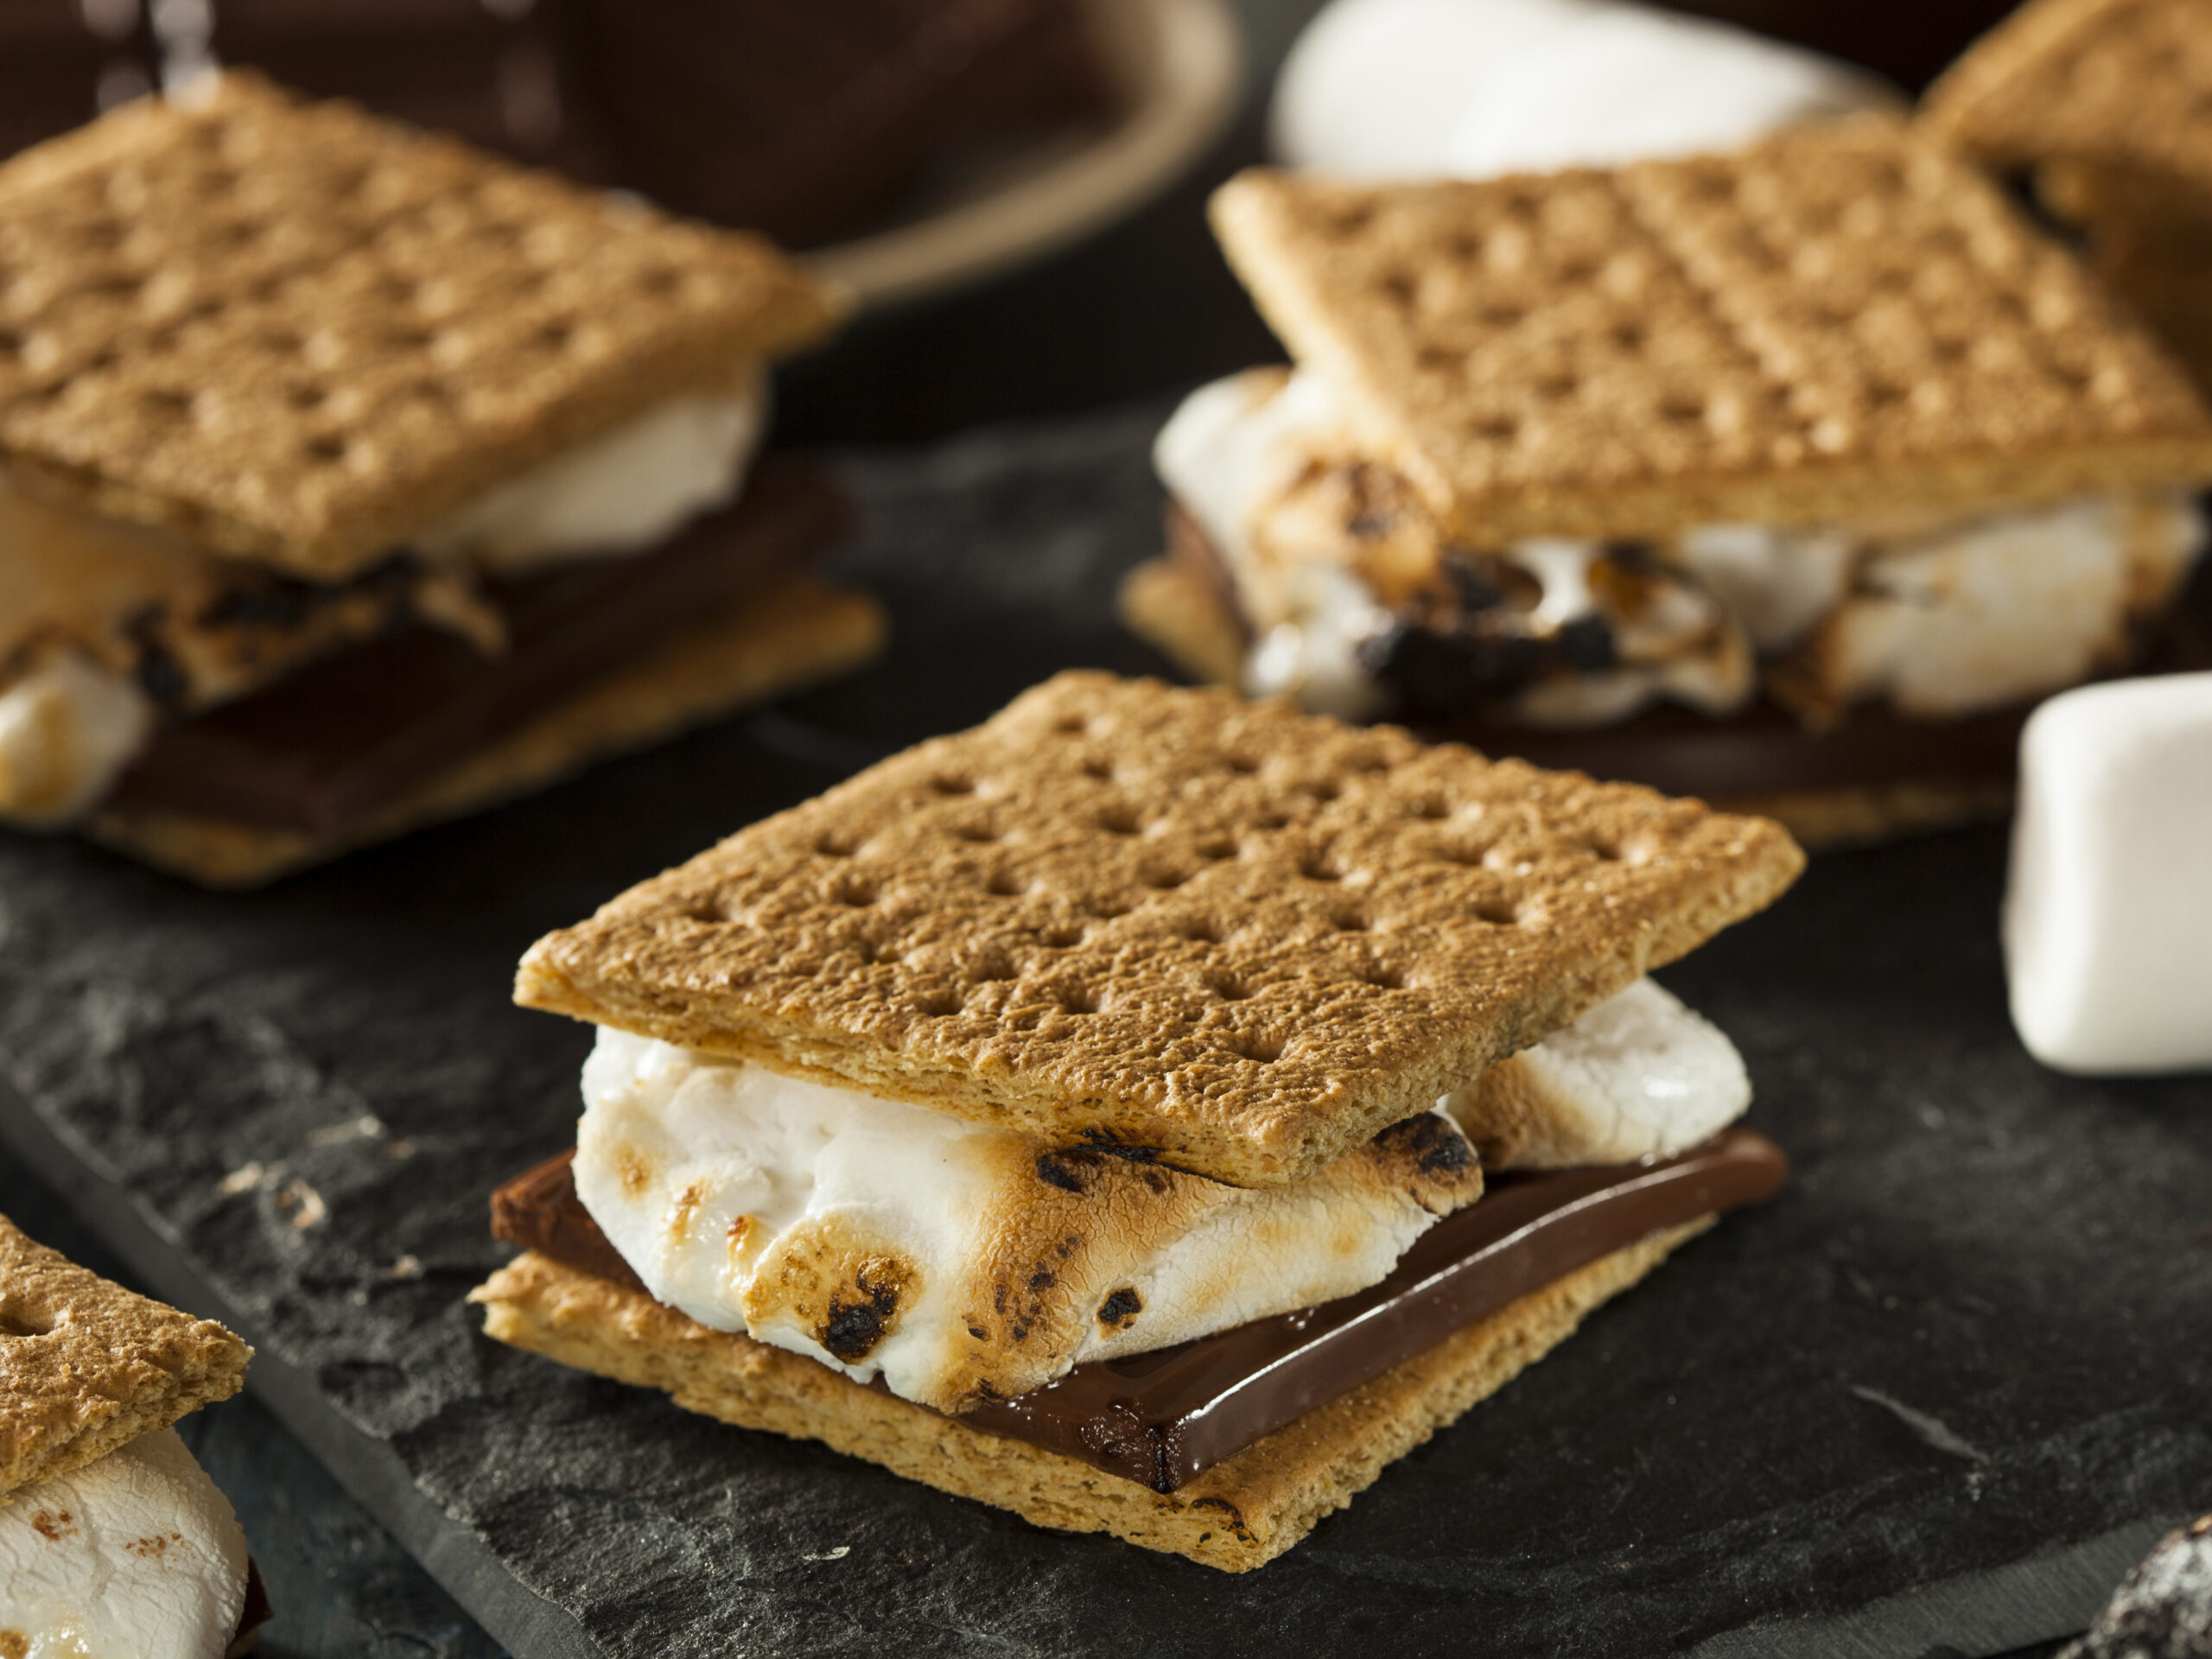 A counter top hosts seven s'mores featuring graham crackers, white marshmallows and thick chocolate slices.  The s'more dessert sandwiches are thick.  Each graham cracker, marshmallow filling and dark chocolate filling rests at a slightly different angle causing every dessert sandwich to look unique.